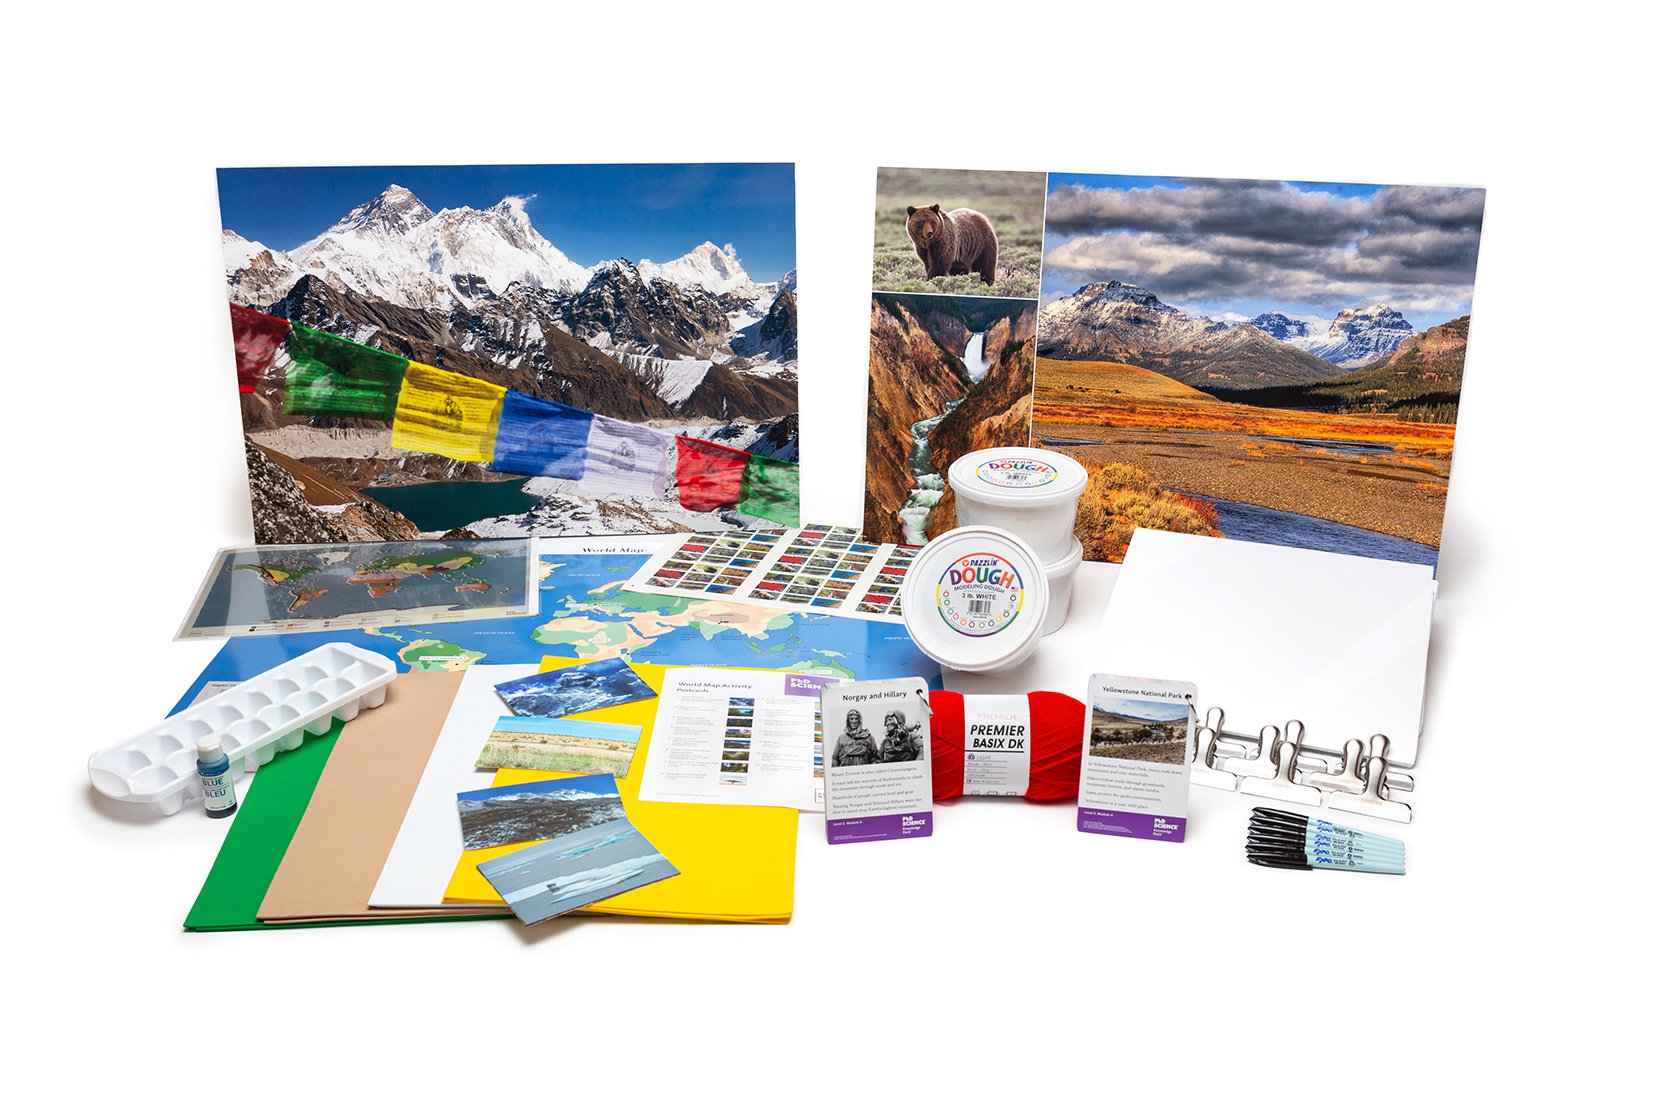 PhD Science hands-on materials kit from Level 2 Module 4 that includes craft foam, modeling dough, whiteboards, and Knowledge Deck cards and posters